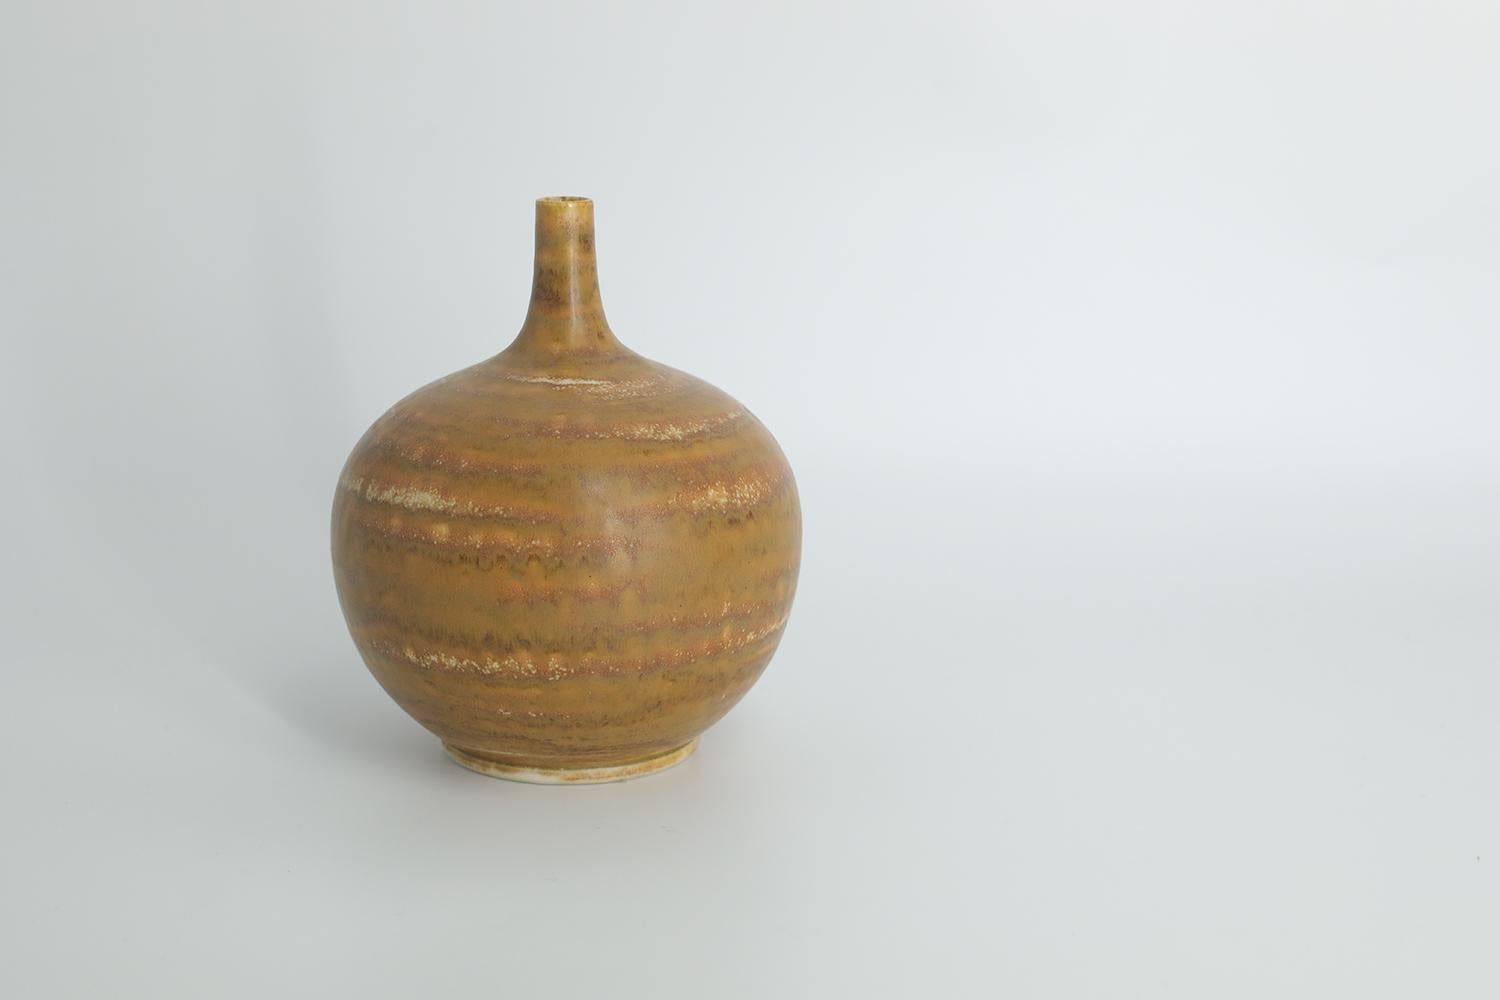 This miniature, collectible stoneware vase was designed by Gunnar Borg for the Swedish manufacture Höganäs Keramik during the 1960s. Handmade by a Master, with the utmost care and attention to details. The vase has the shape of a ball and is colored